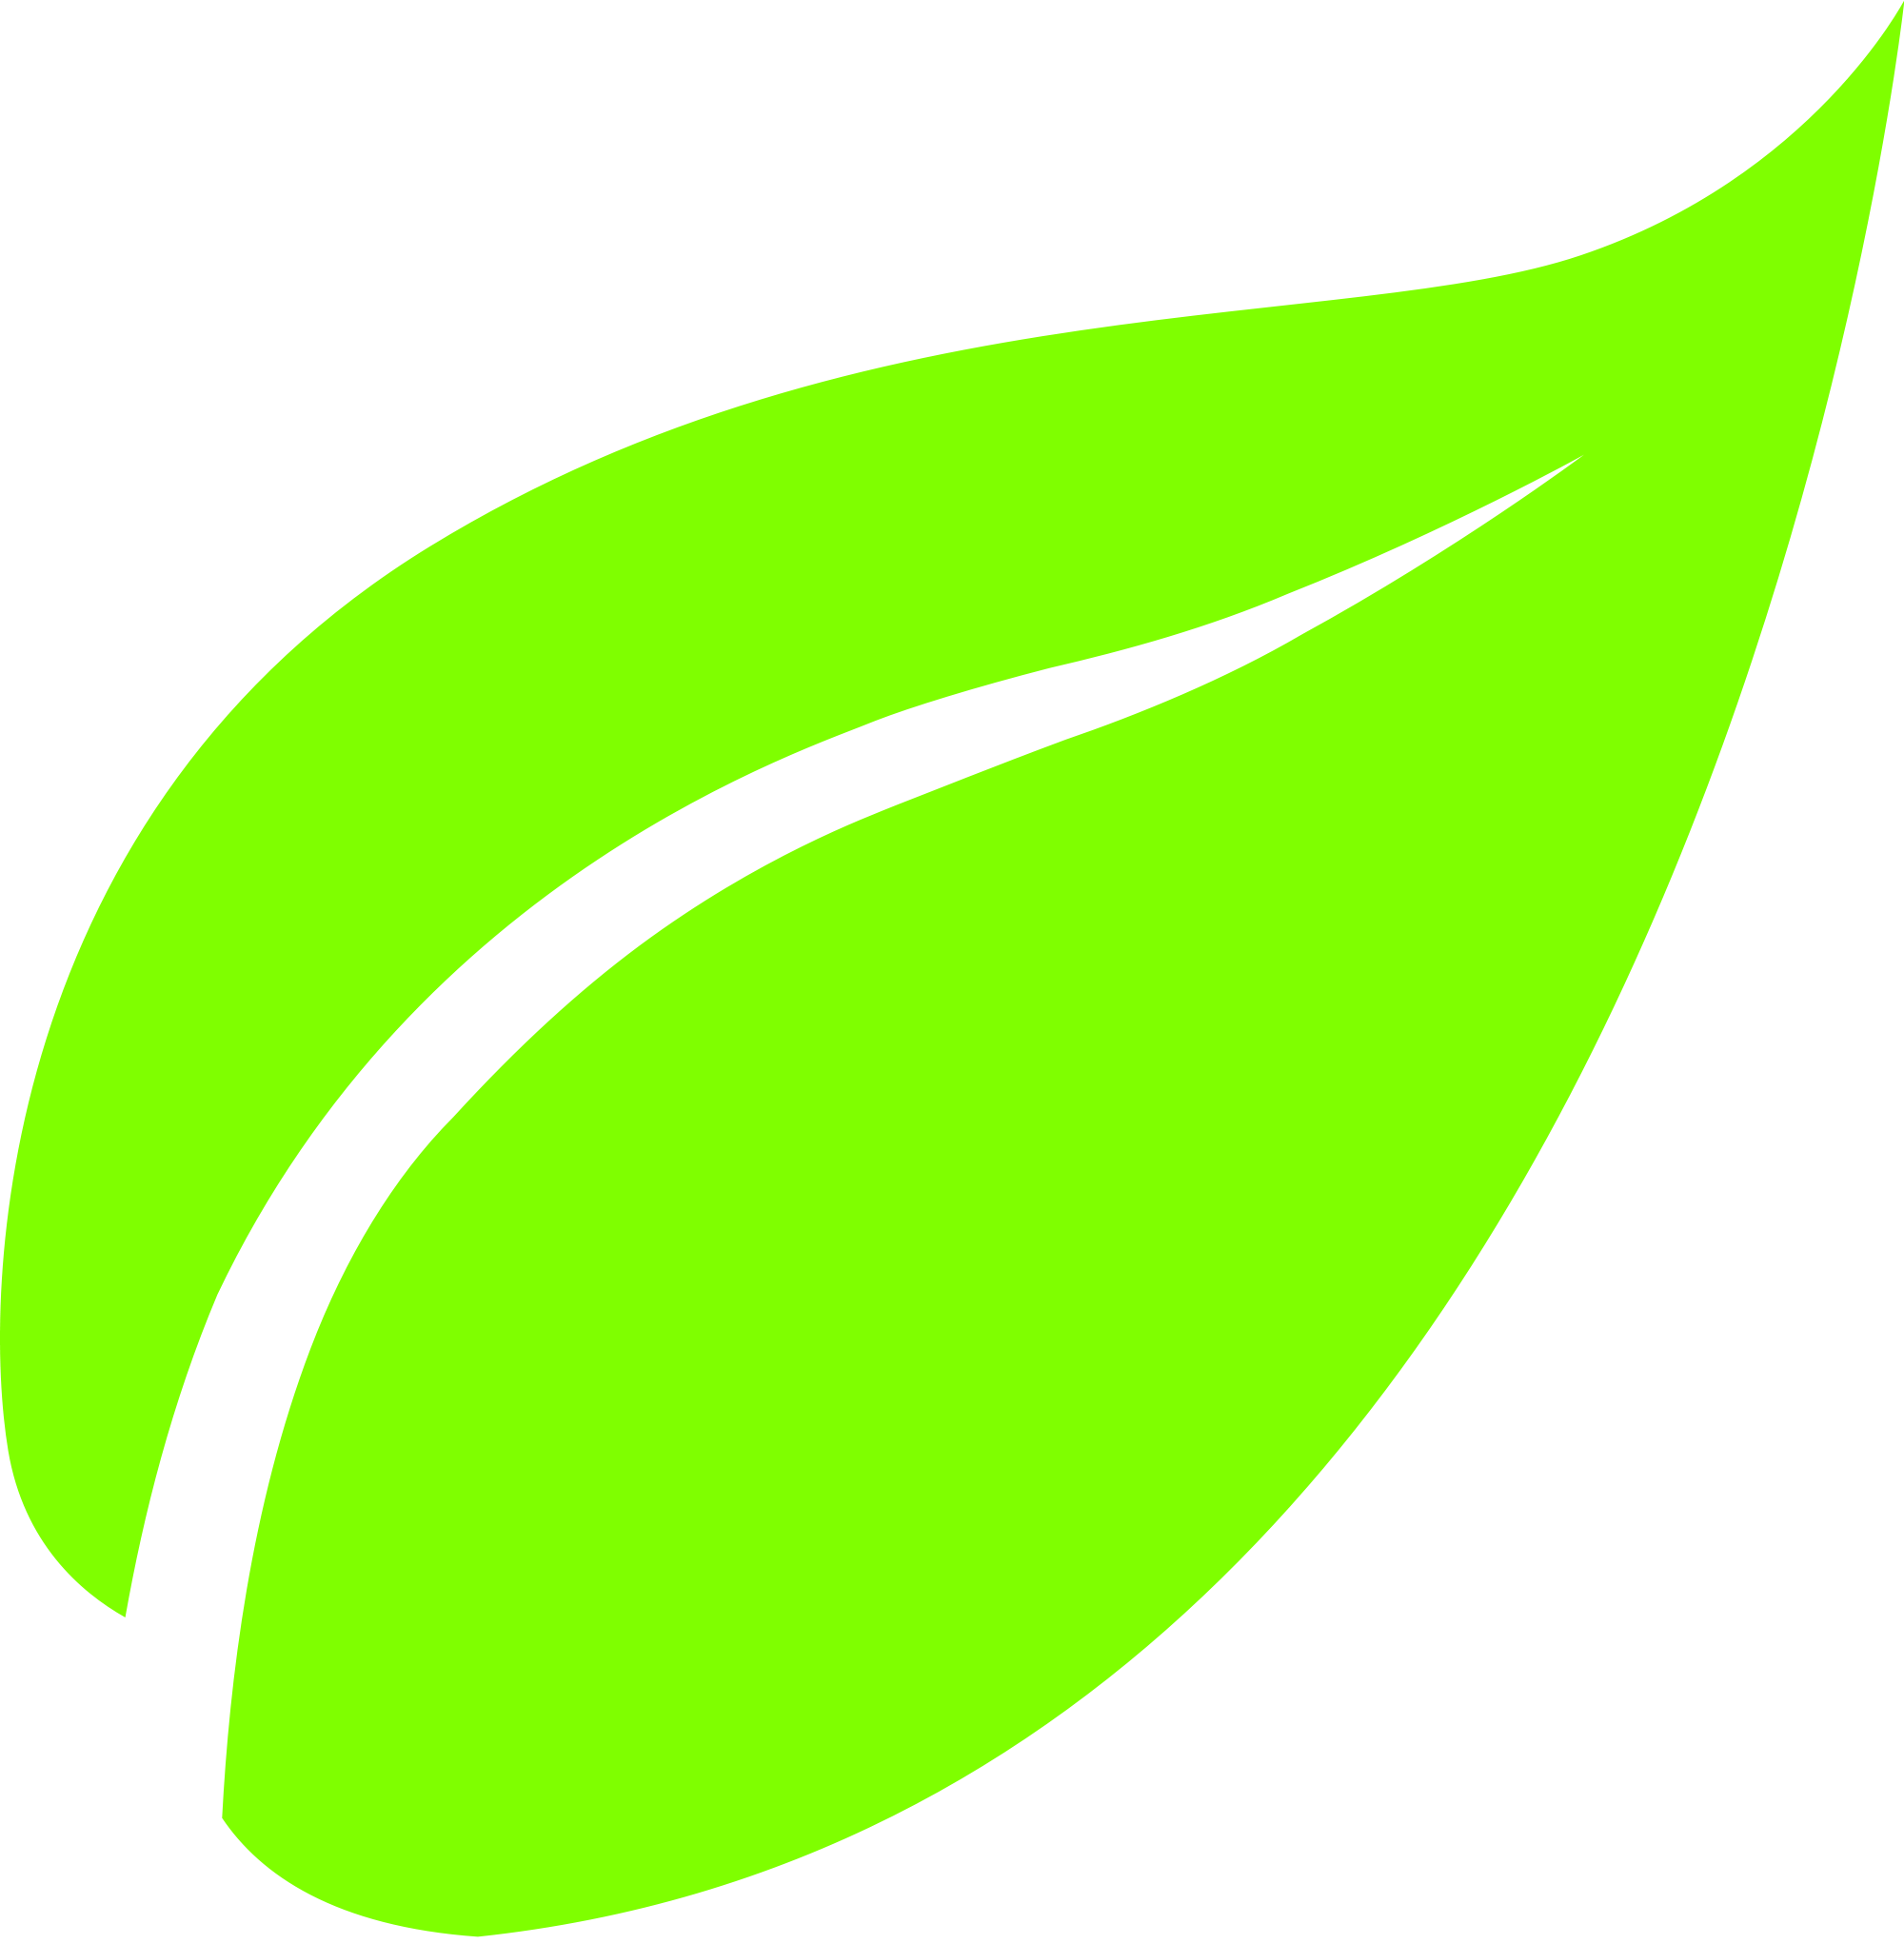 File:Leaf icon 15.svg - Wikimedia Commons